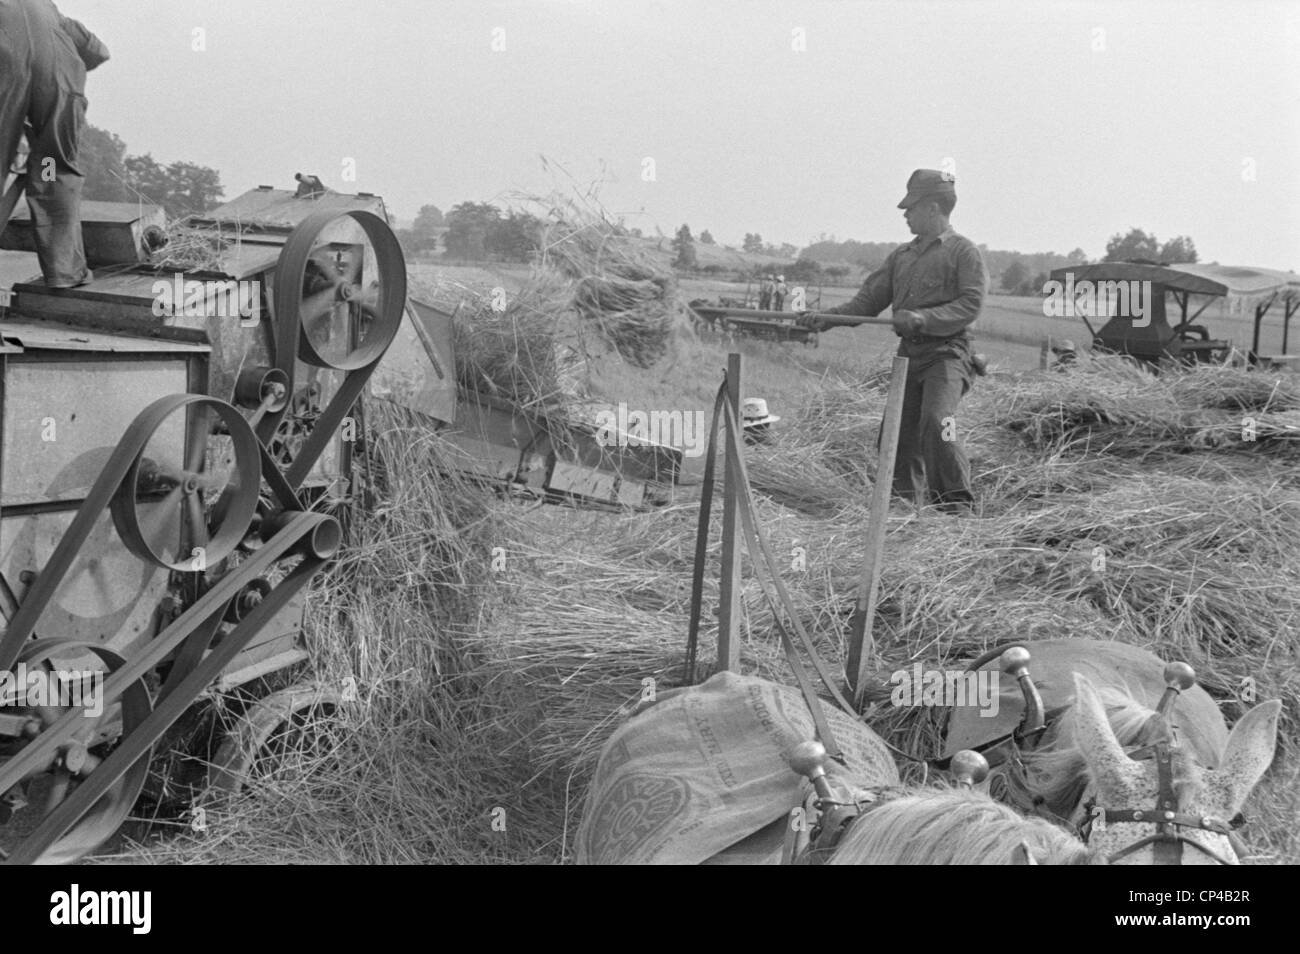 Threshing wheat in central Ohio. A farmer forks wheat into the feeding belt of stationary threshing machine. He stands on a Stock Photo